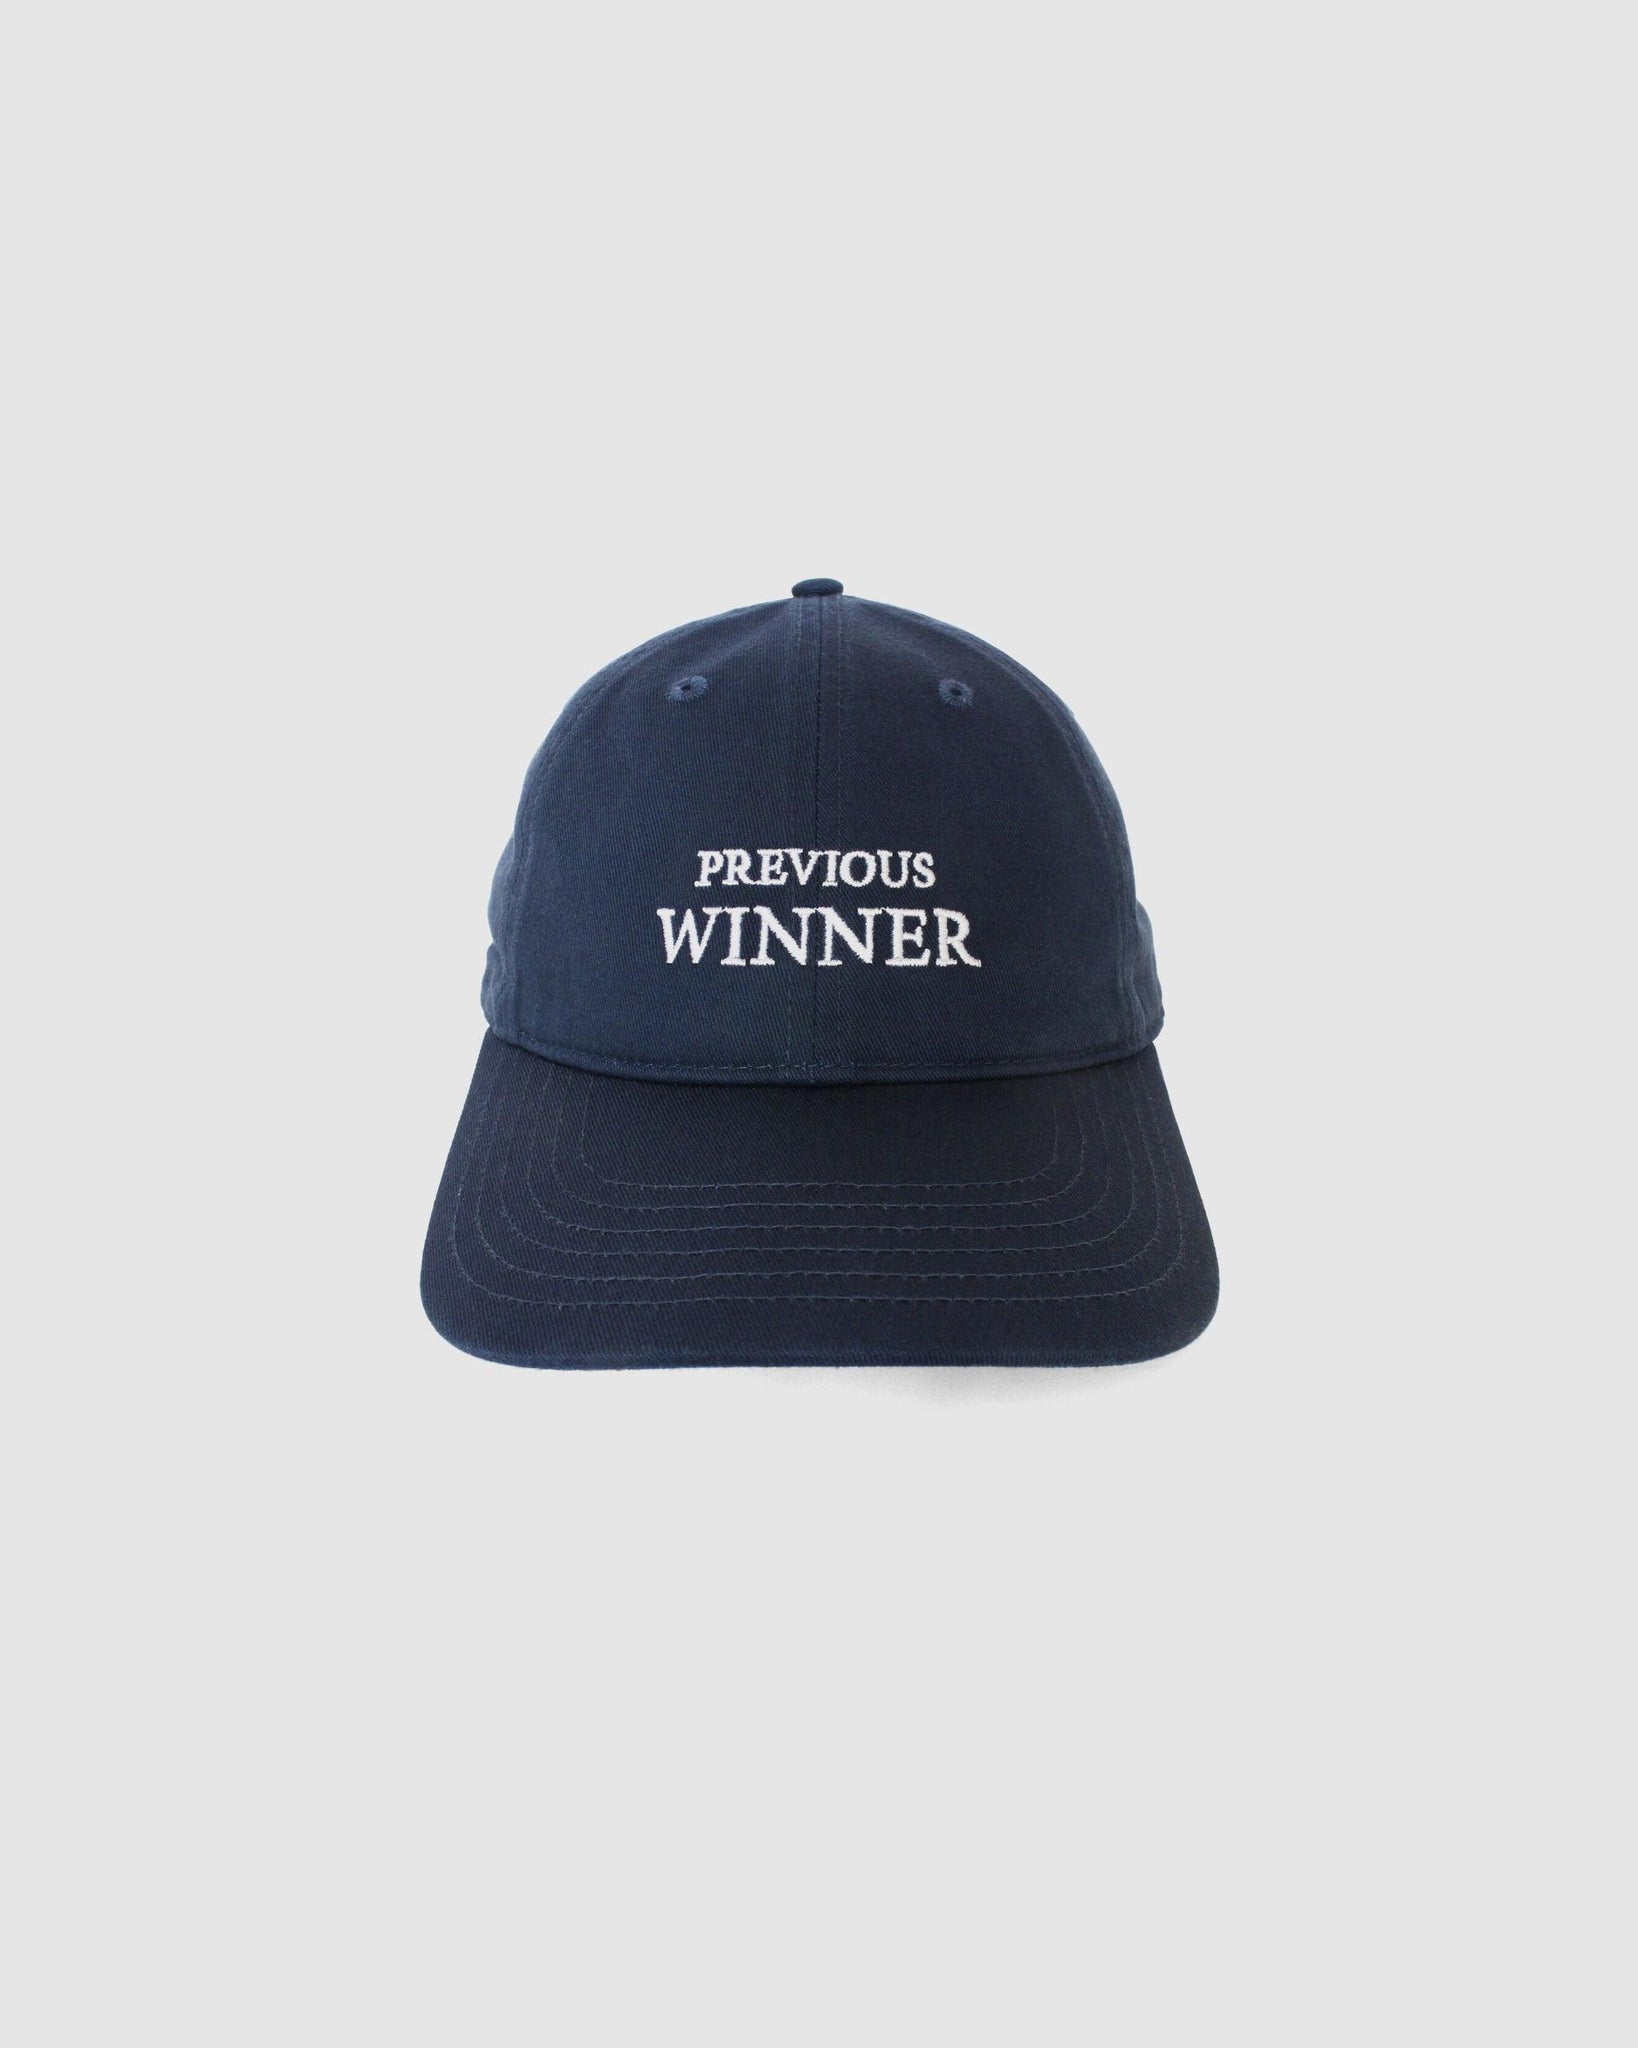 Previous Winner Hat - {{ collection.title }} - Chinatown Country Club 